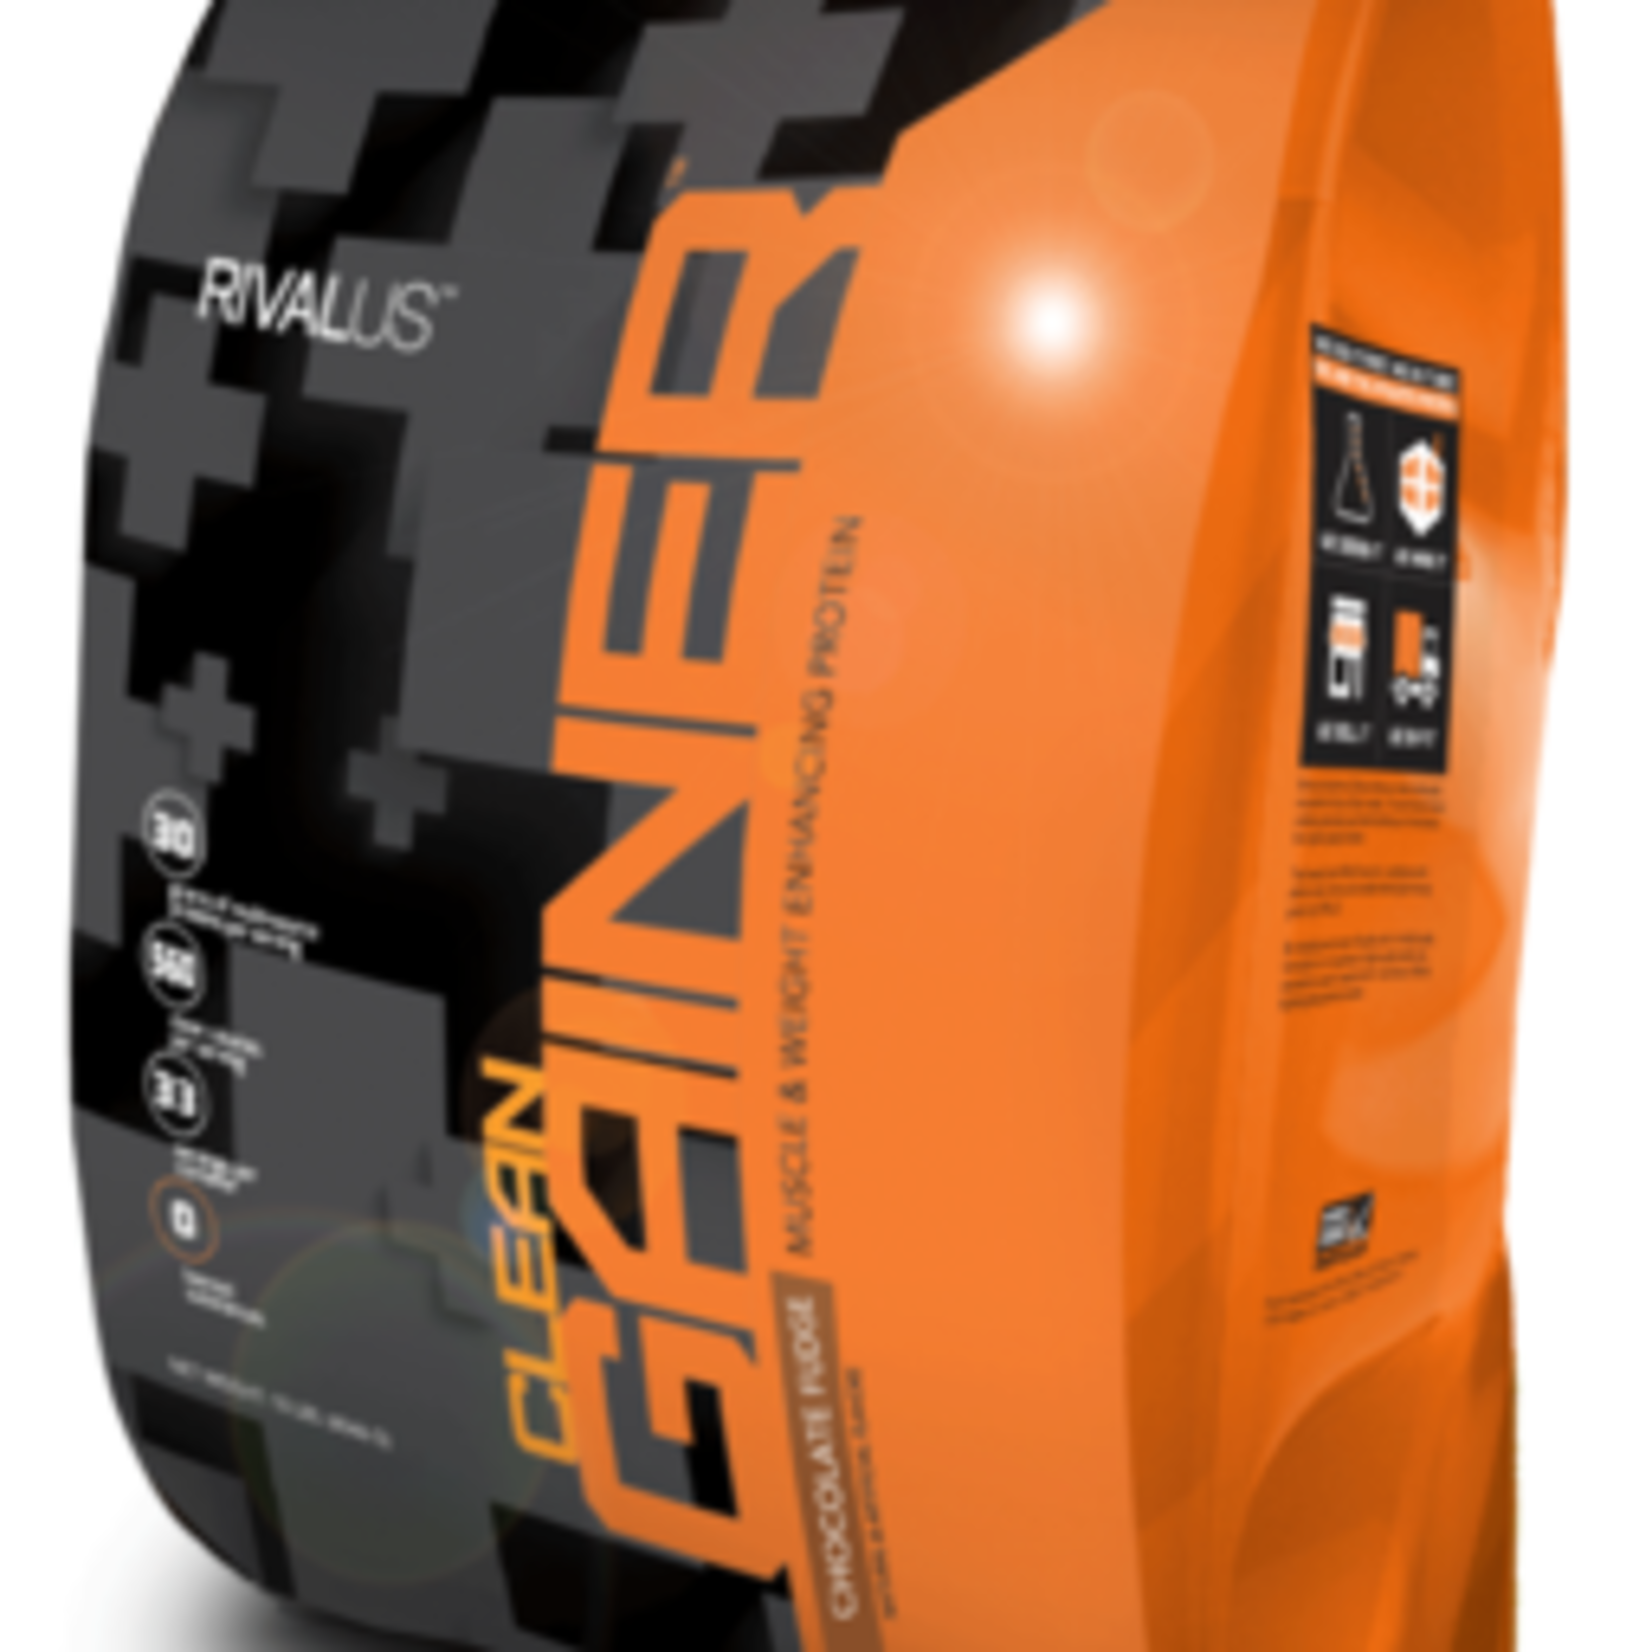 Rival US CLEAN GAINER BY RIVAL US